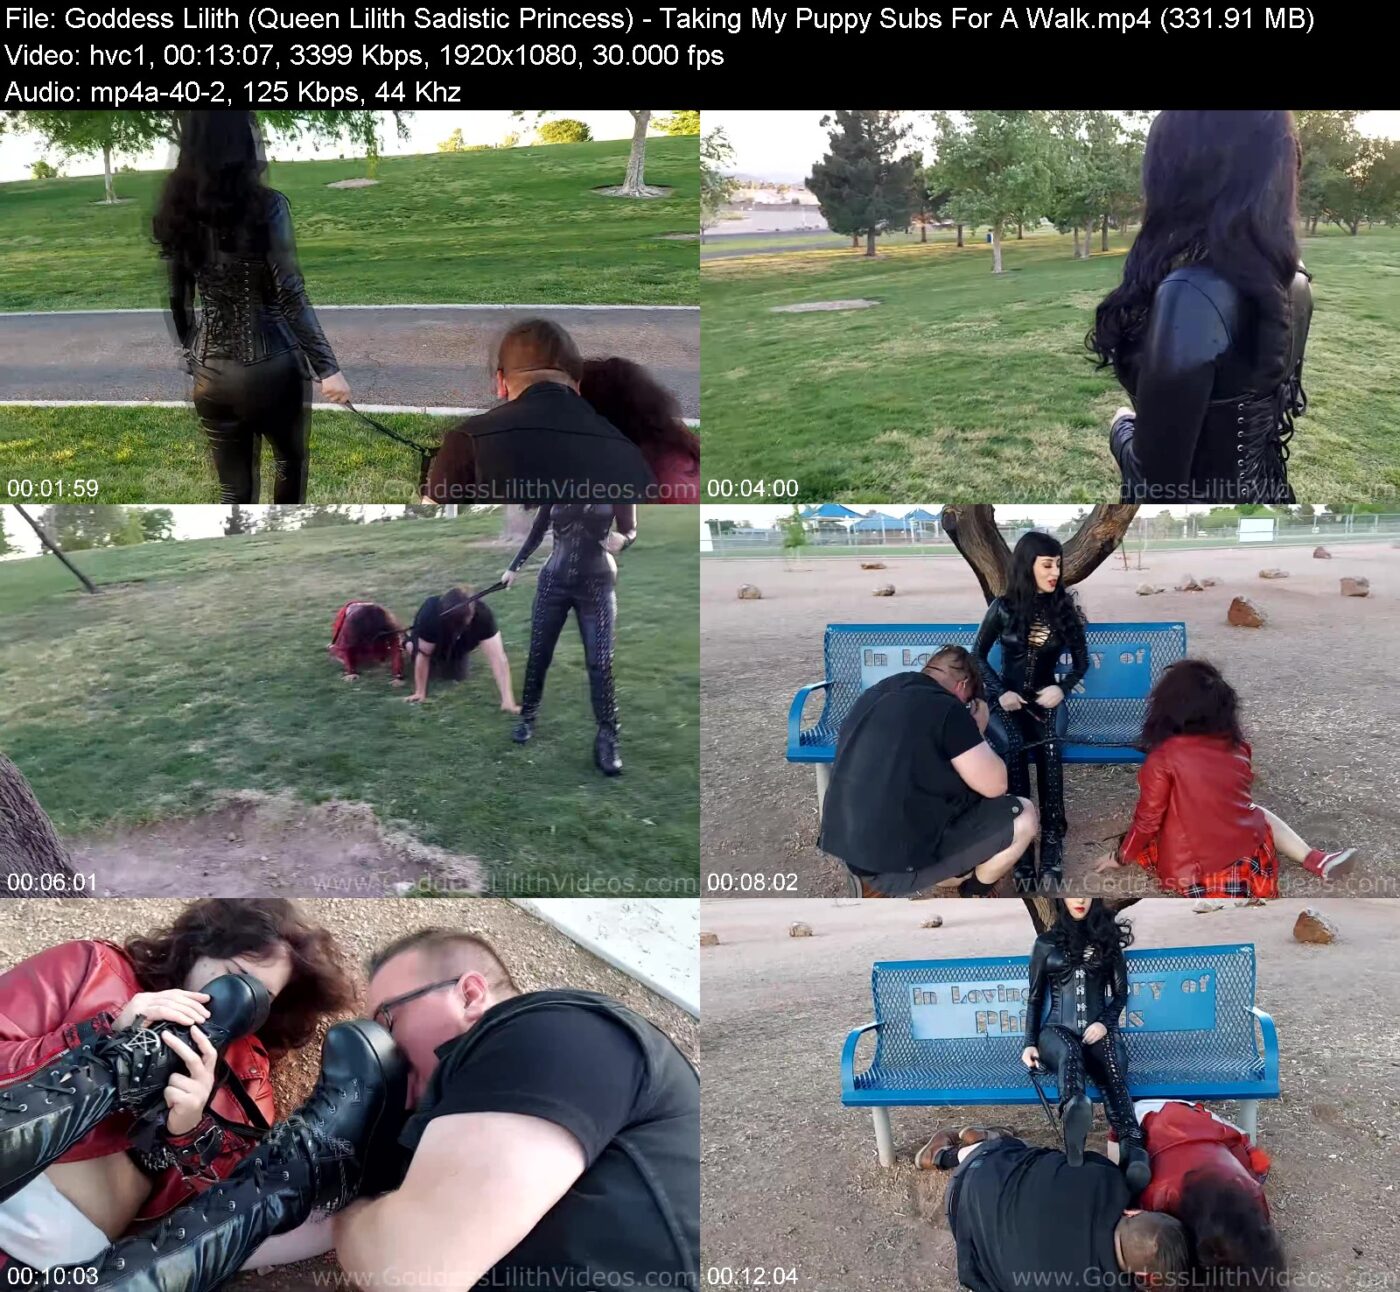 Goddess Lilith (Queen Lilith Sadistic Princess) in Taking My Puppy Subs For A Walk